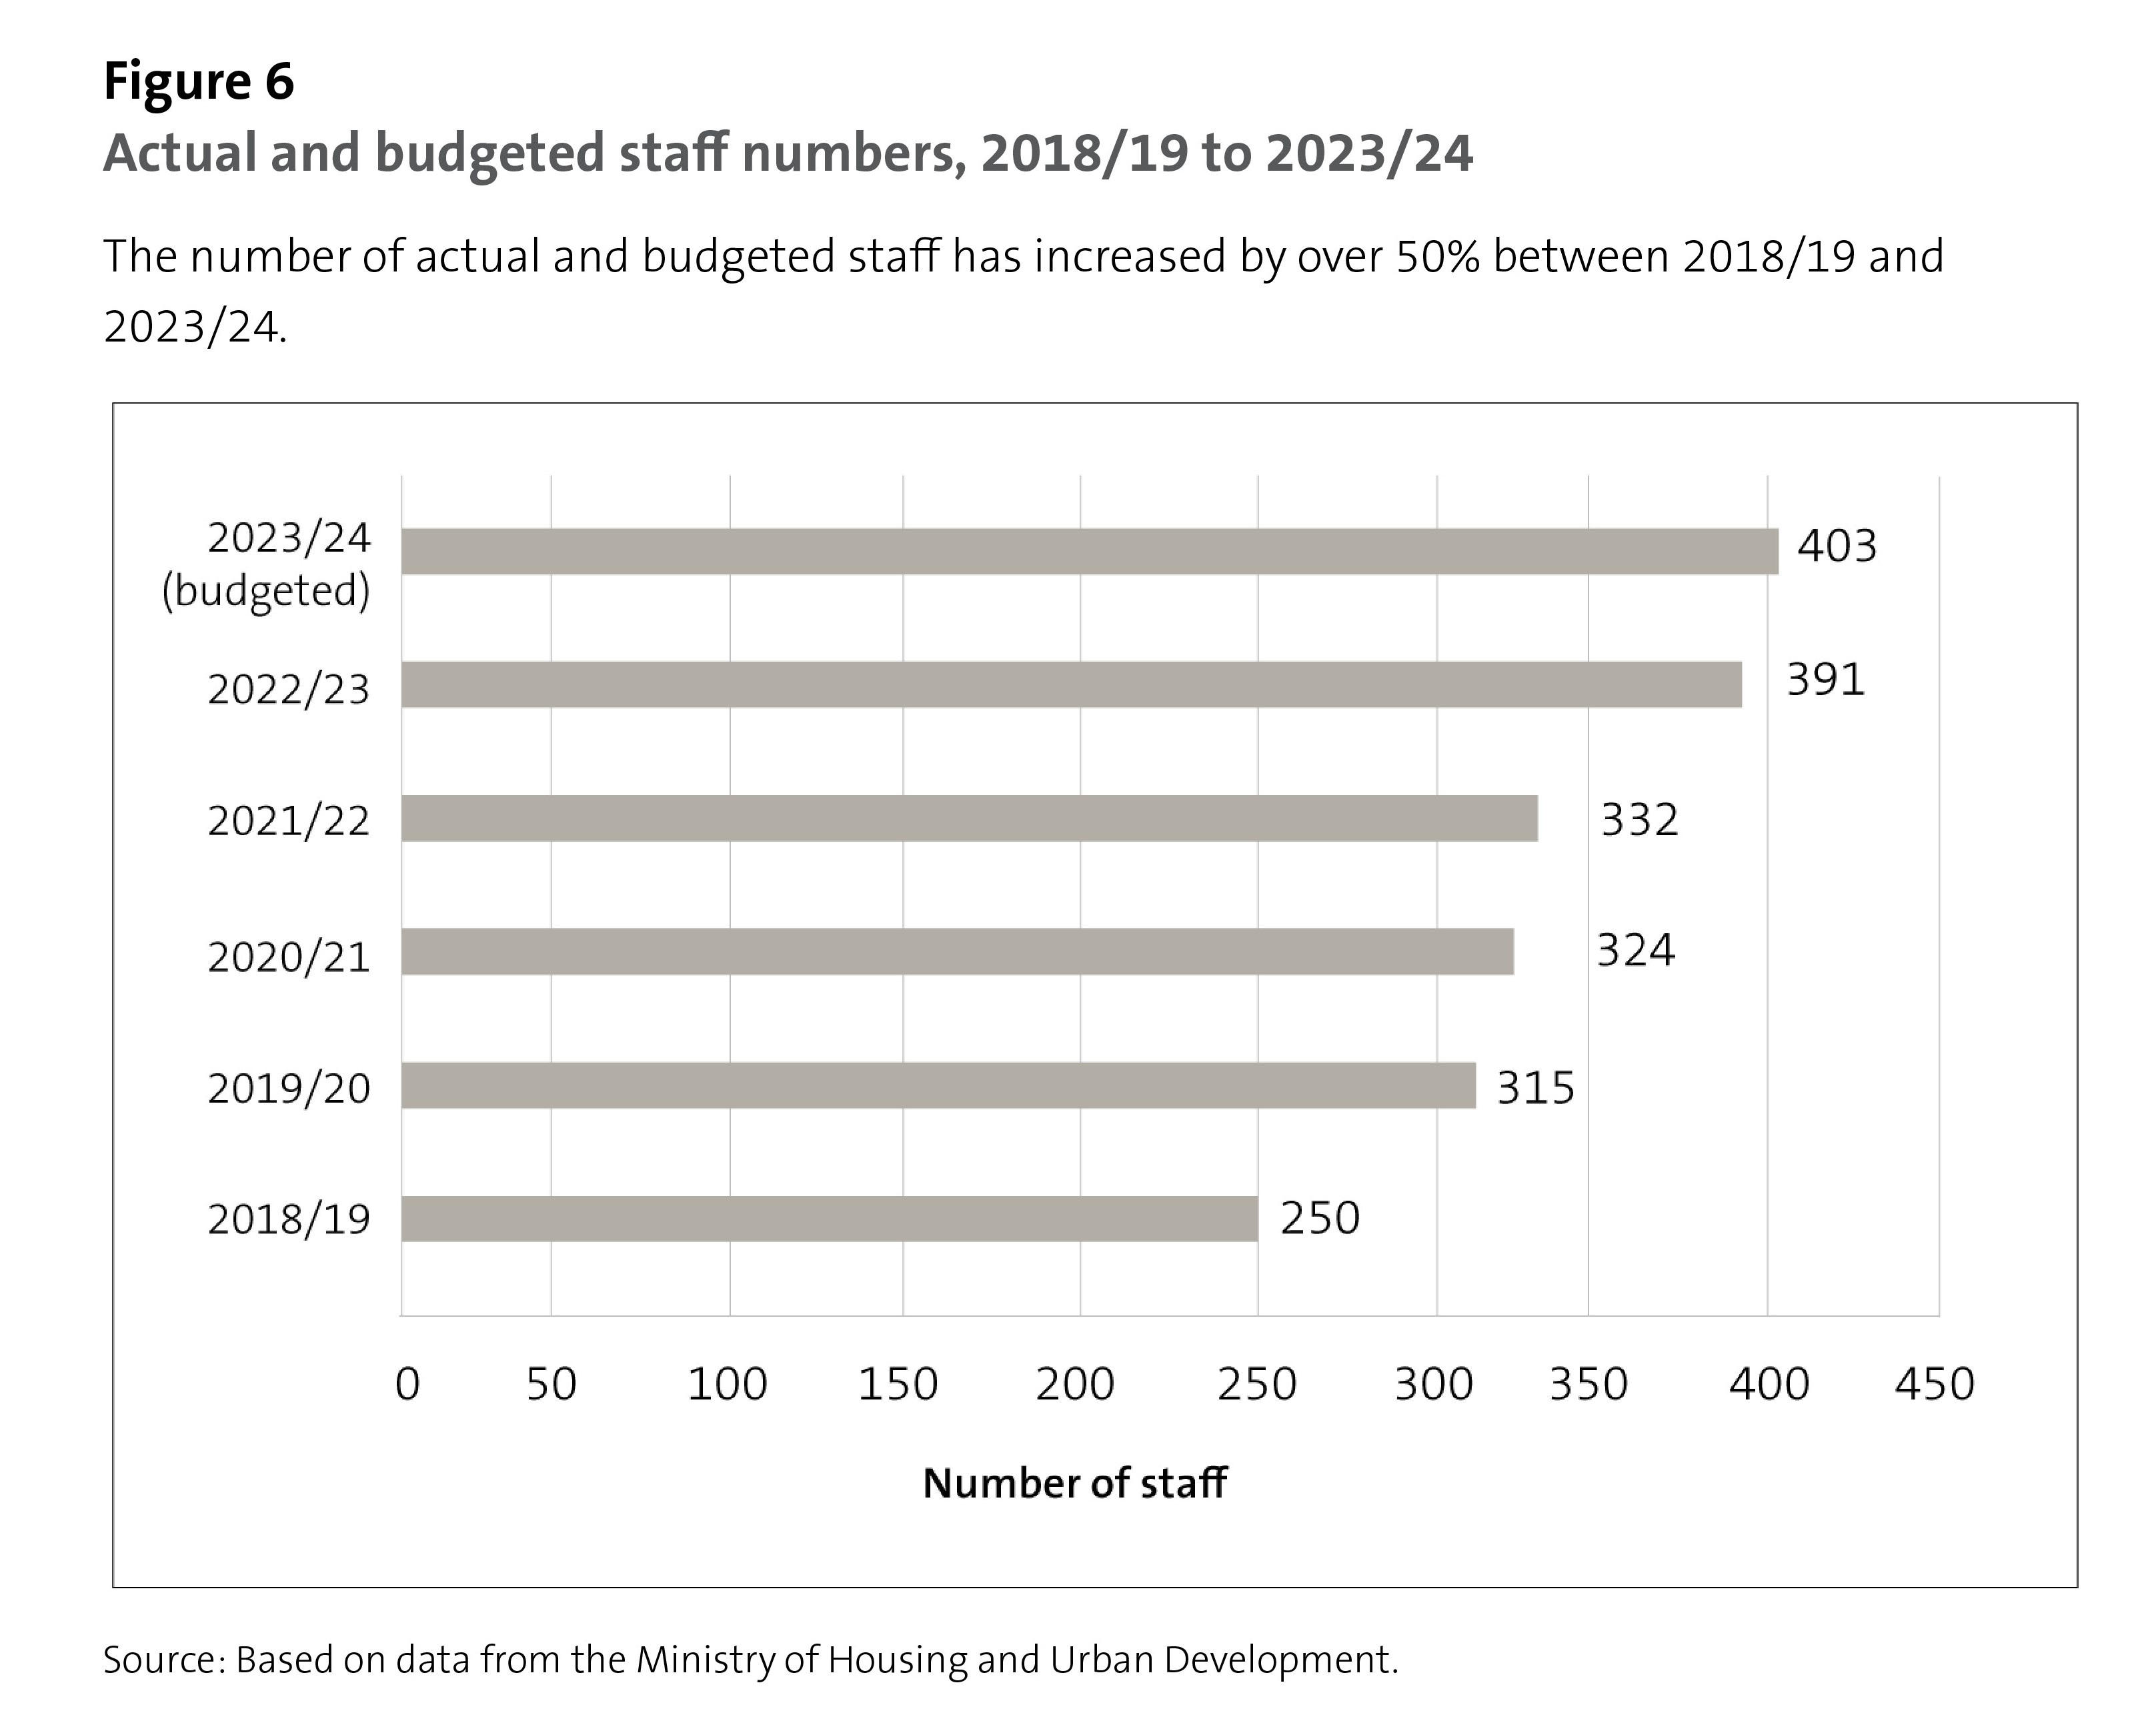 Figure 6: Actual and budgeted staff numbers, 2018/19 to 2023/24